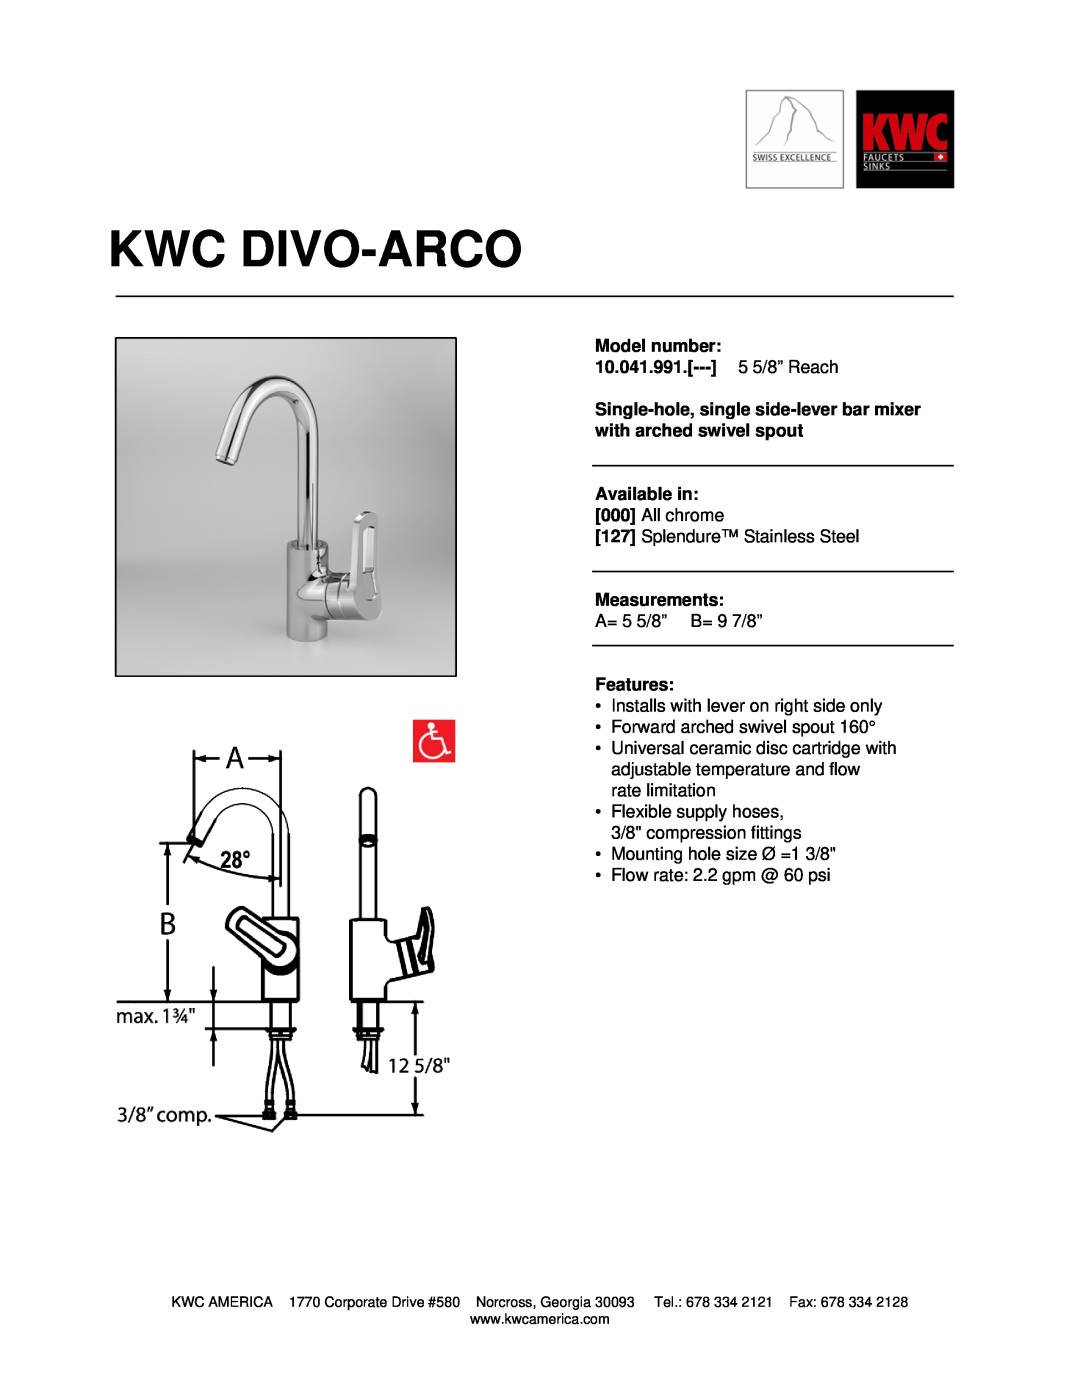 KWC manual Kwc Divo-Arco, Model number 10.041.991.--- 5 5/8” Reach, Available in, Measurements, Features 